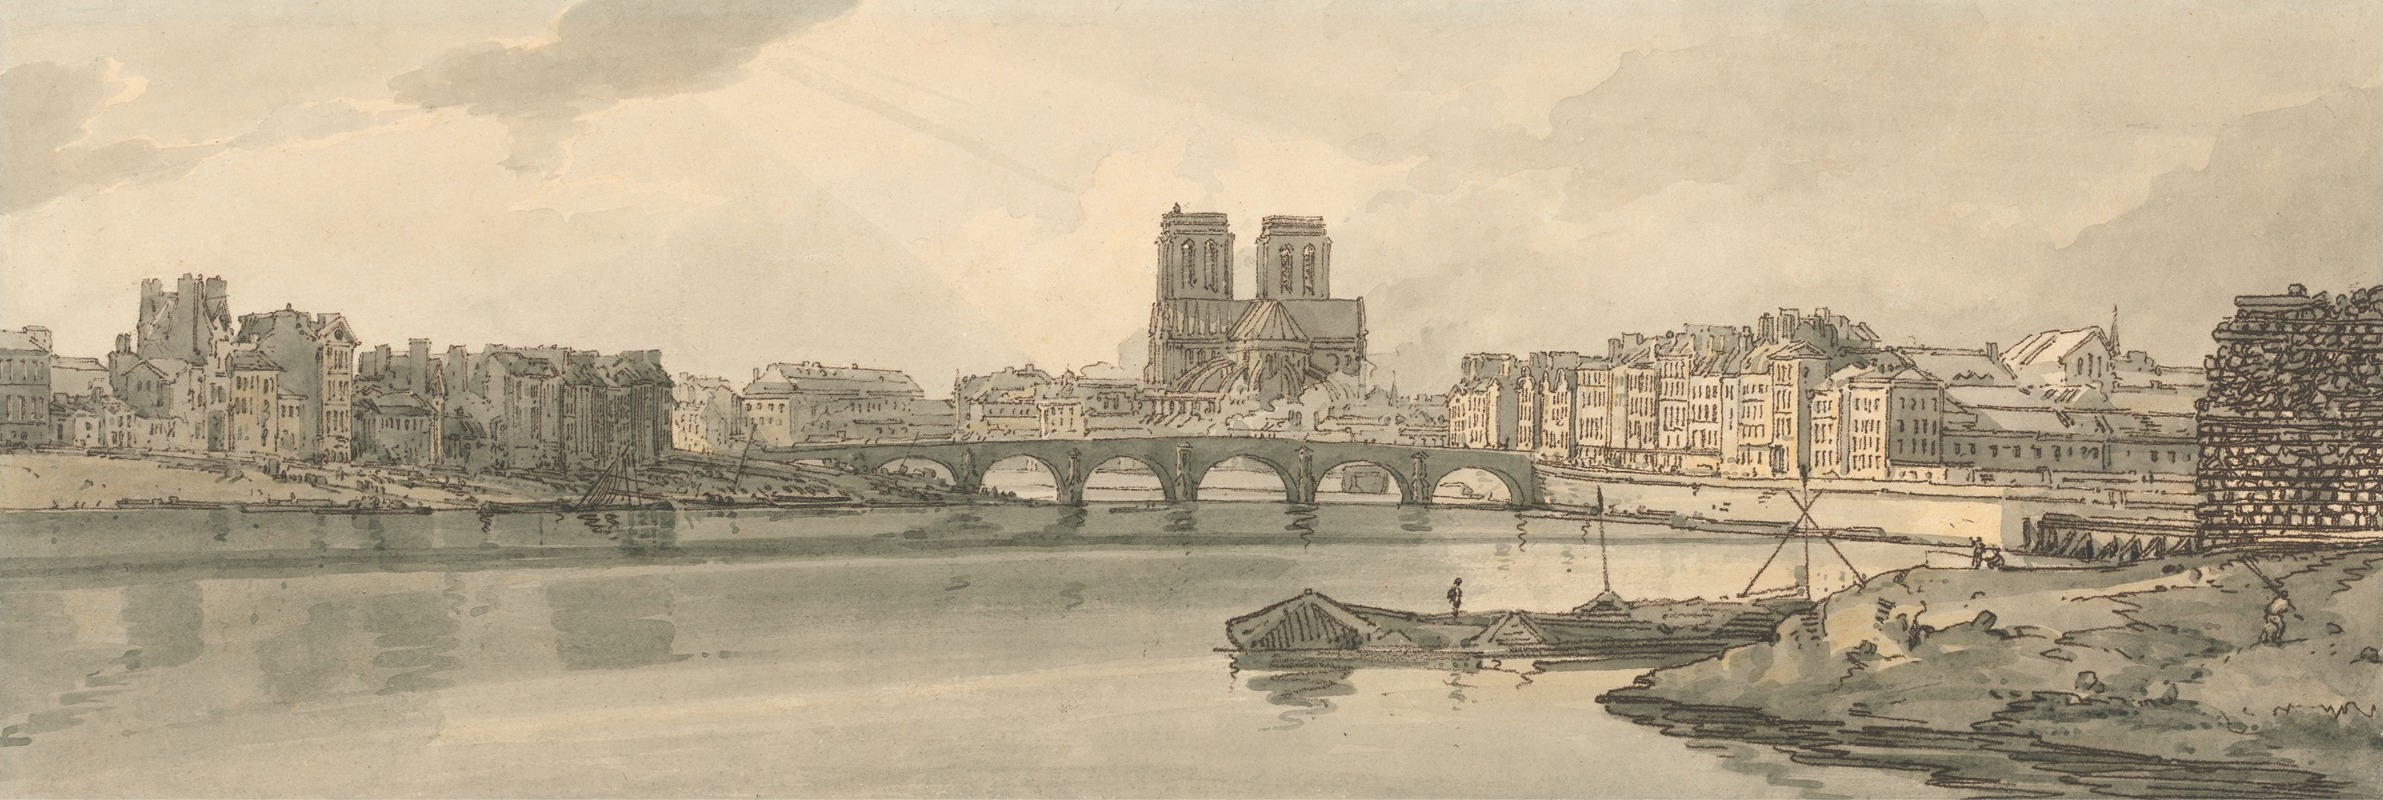 Thomas Girtin - A View of the Pont de la Tournelle and Notre Dame Taken From the Arsenal